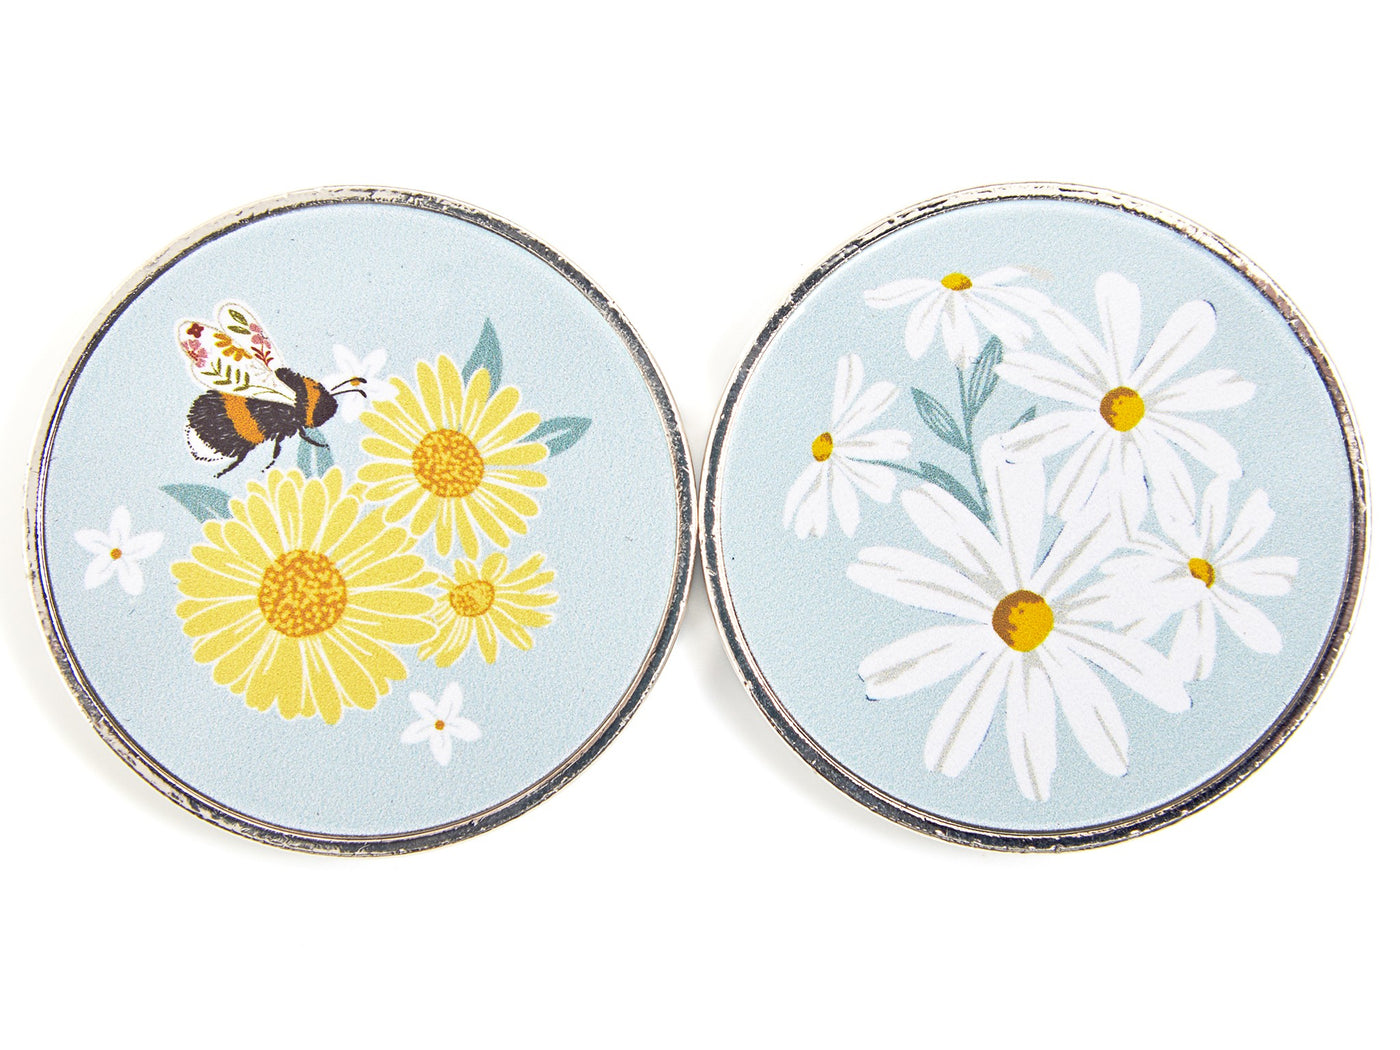 Bee/Daisy Pattern weights - fabric weights by Sew Easy. Sets of 2/4